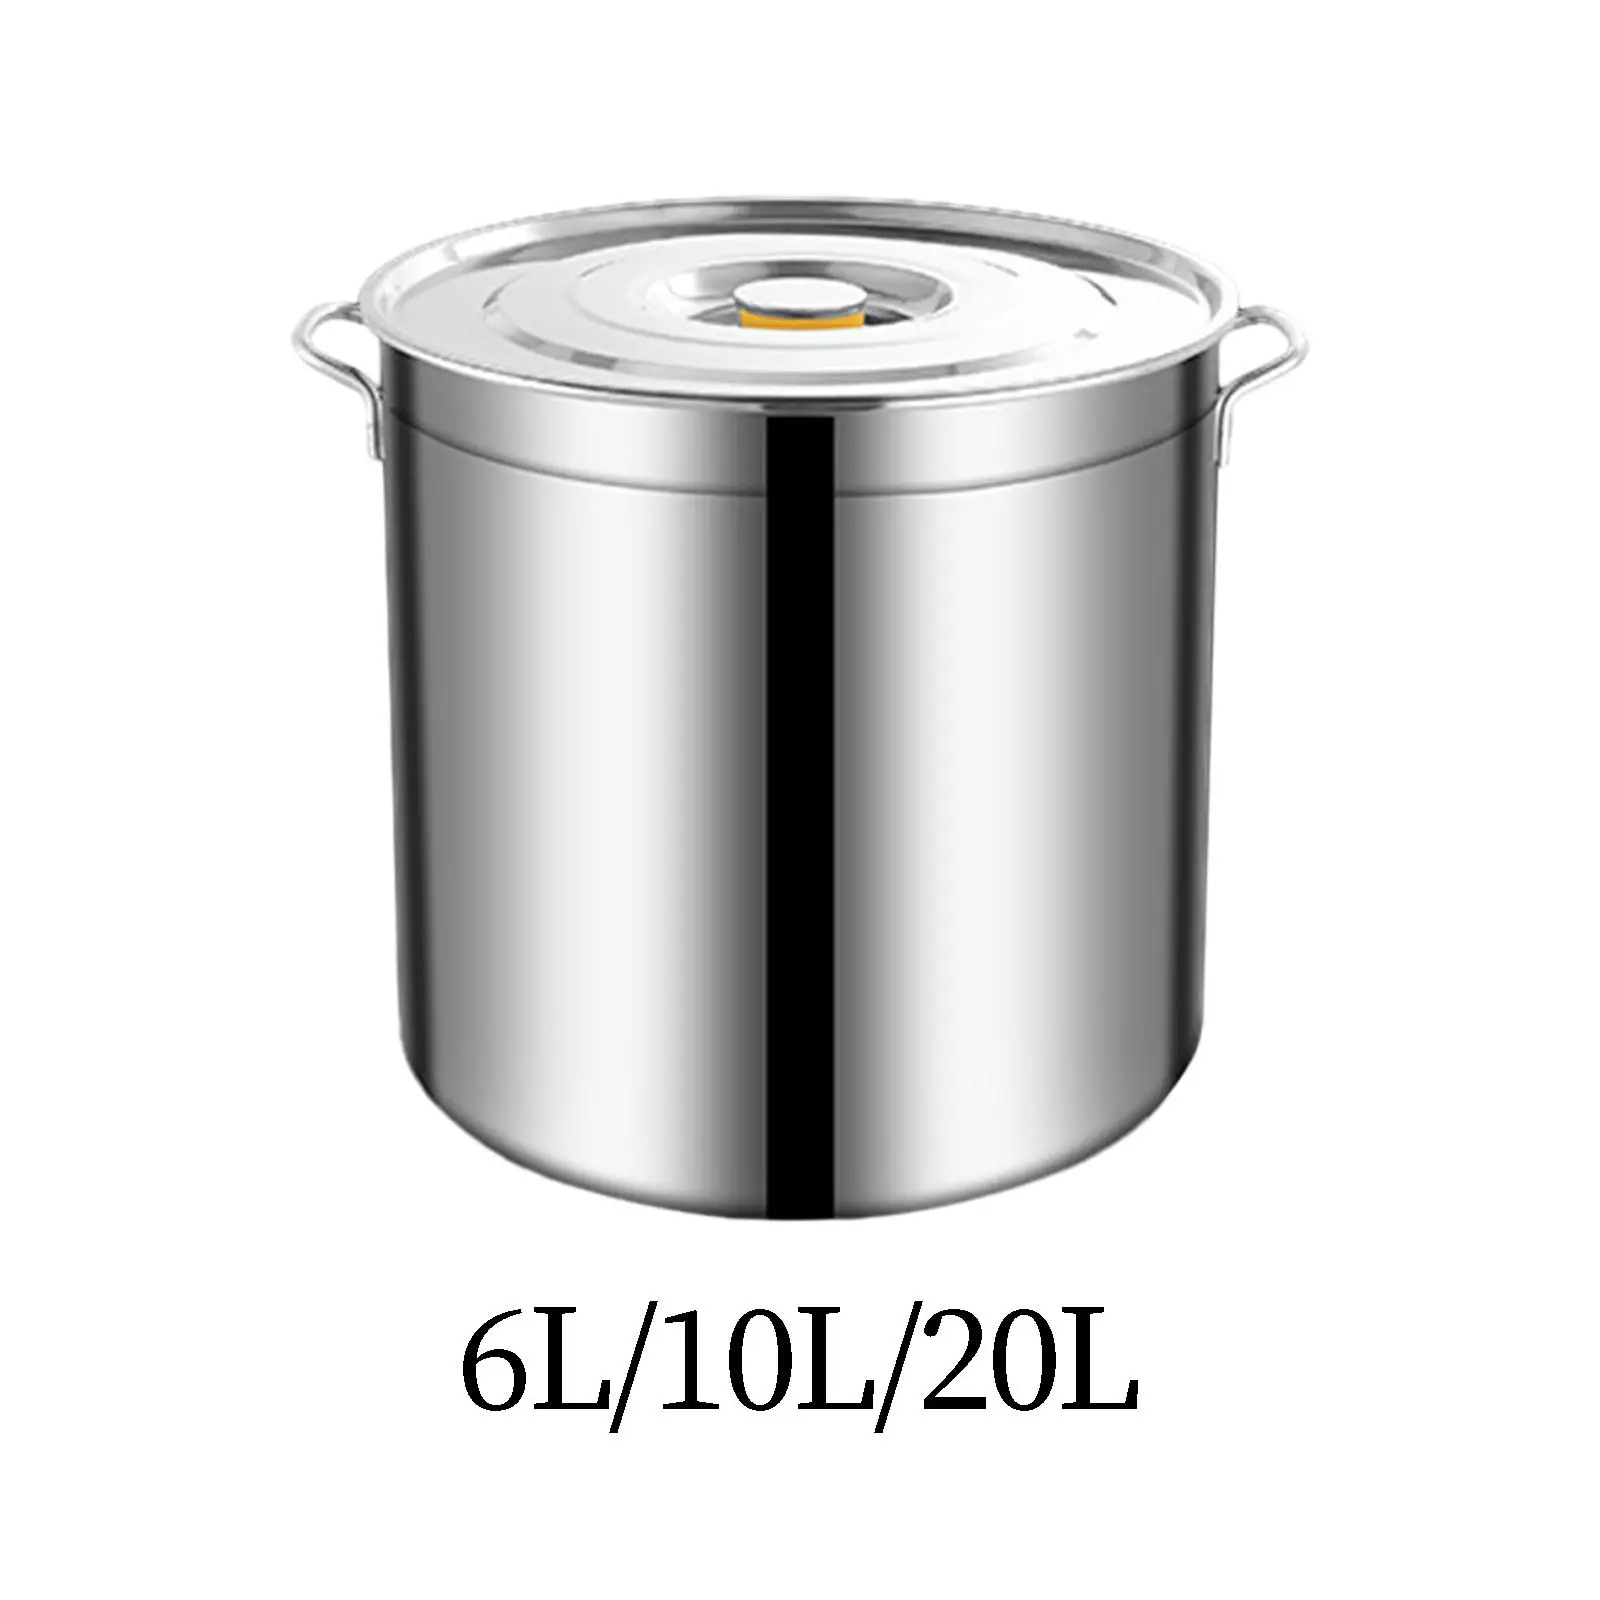 Stainless Steel Stockpot Easy to Clean Oil Bucket Canning Pasta Pot with Lid Tall Cooking Pot for Household Commercial Canteens